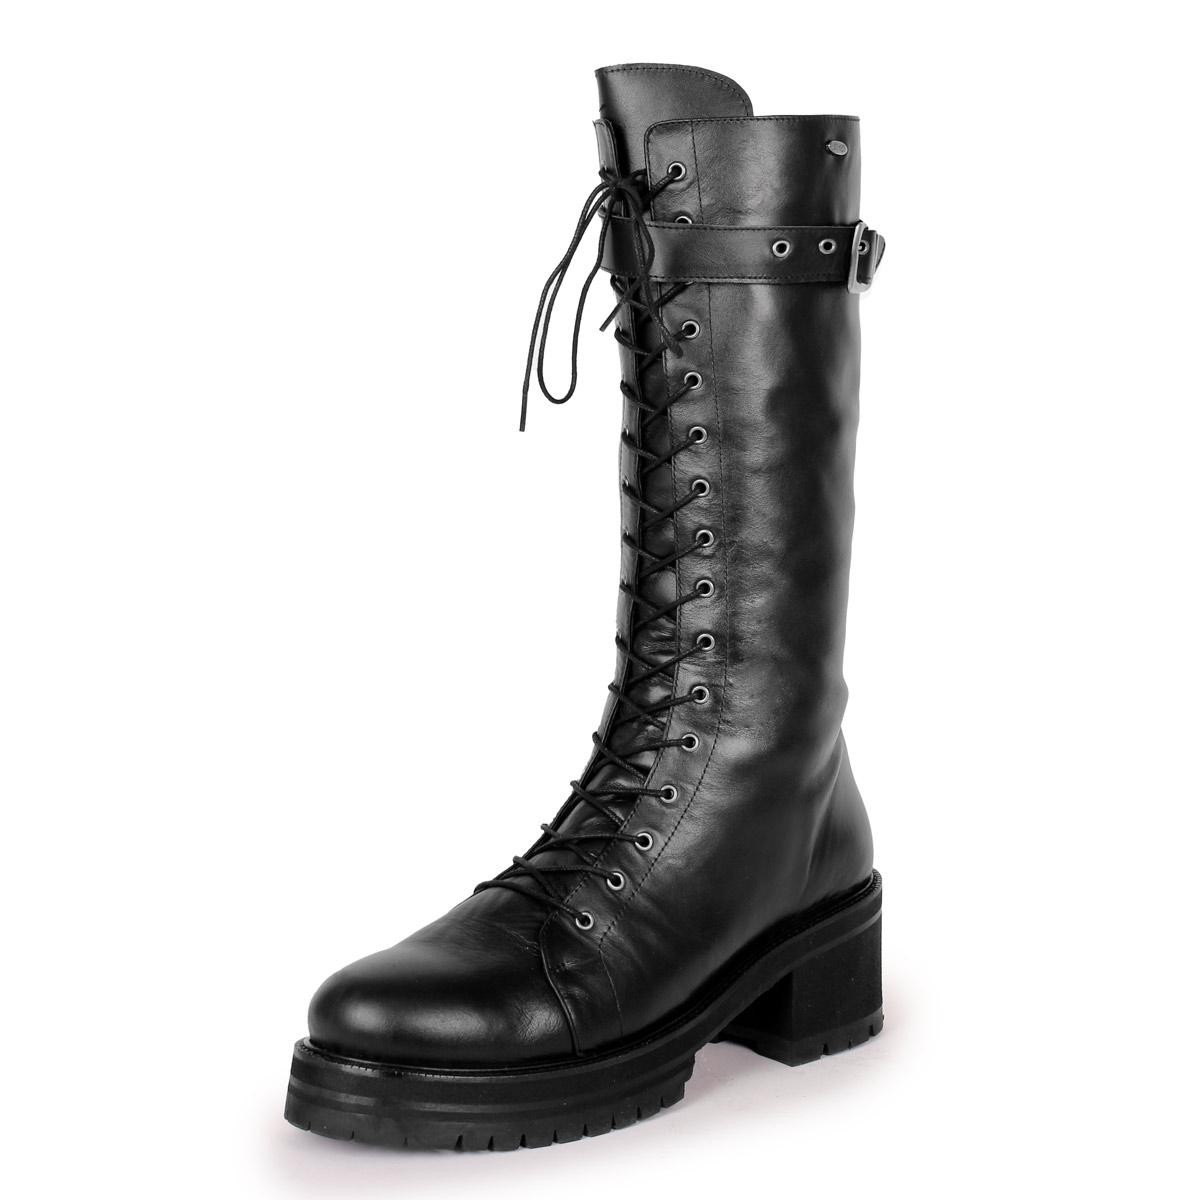 Boots Combat/Gothic style calf-high standard size